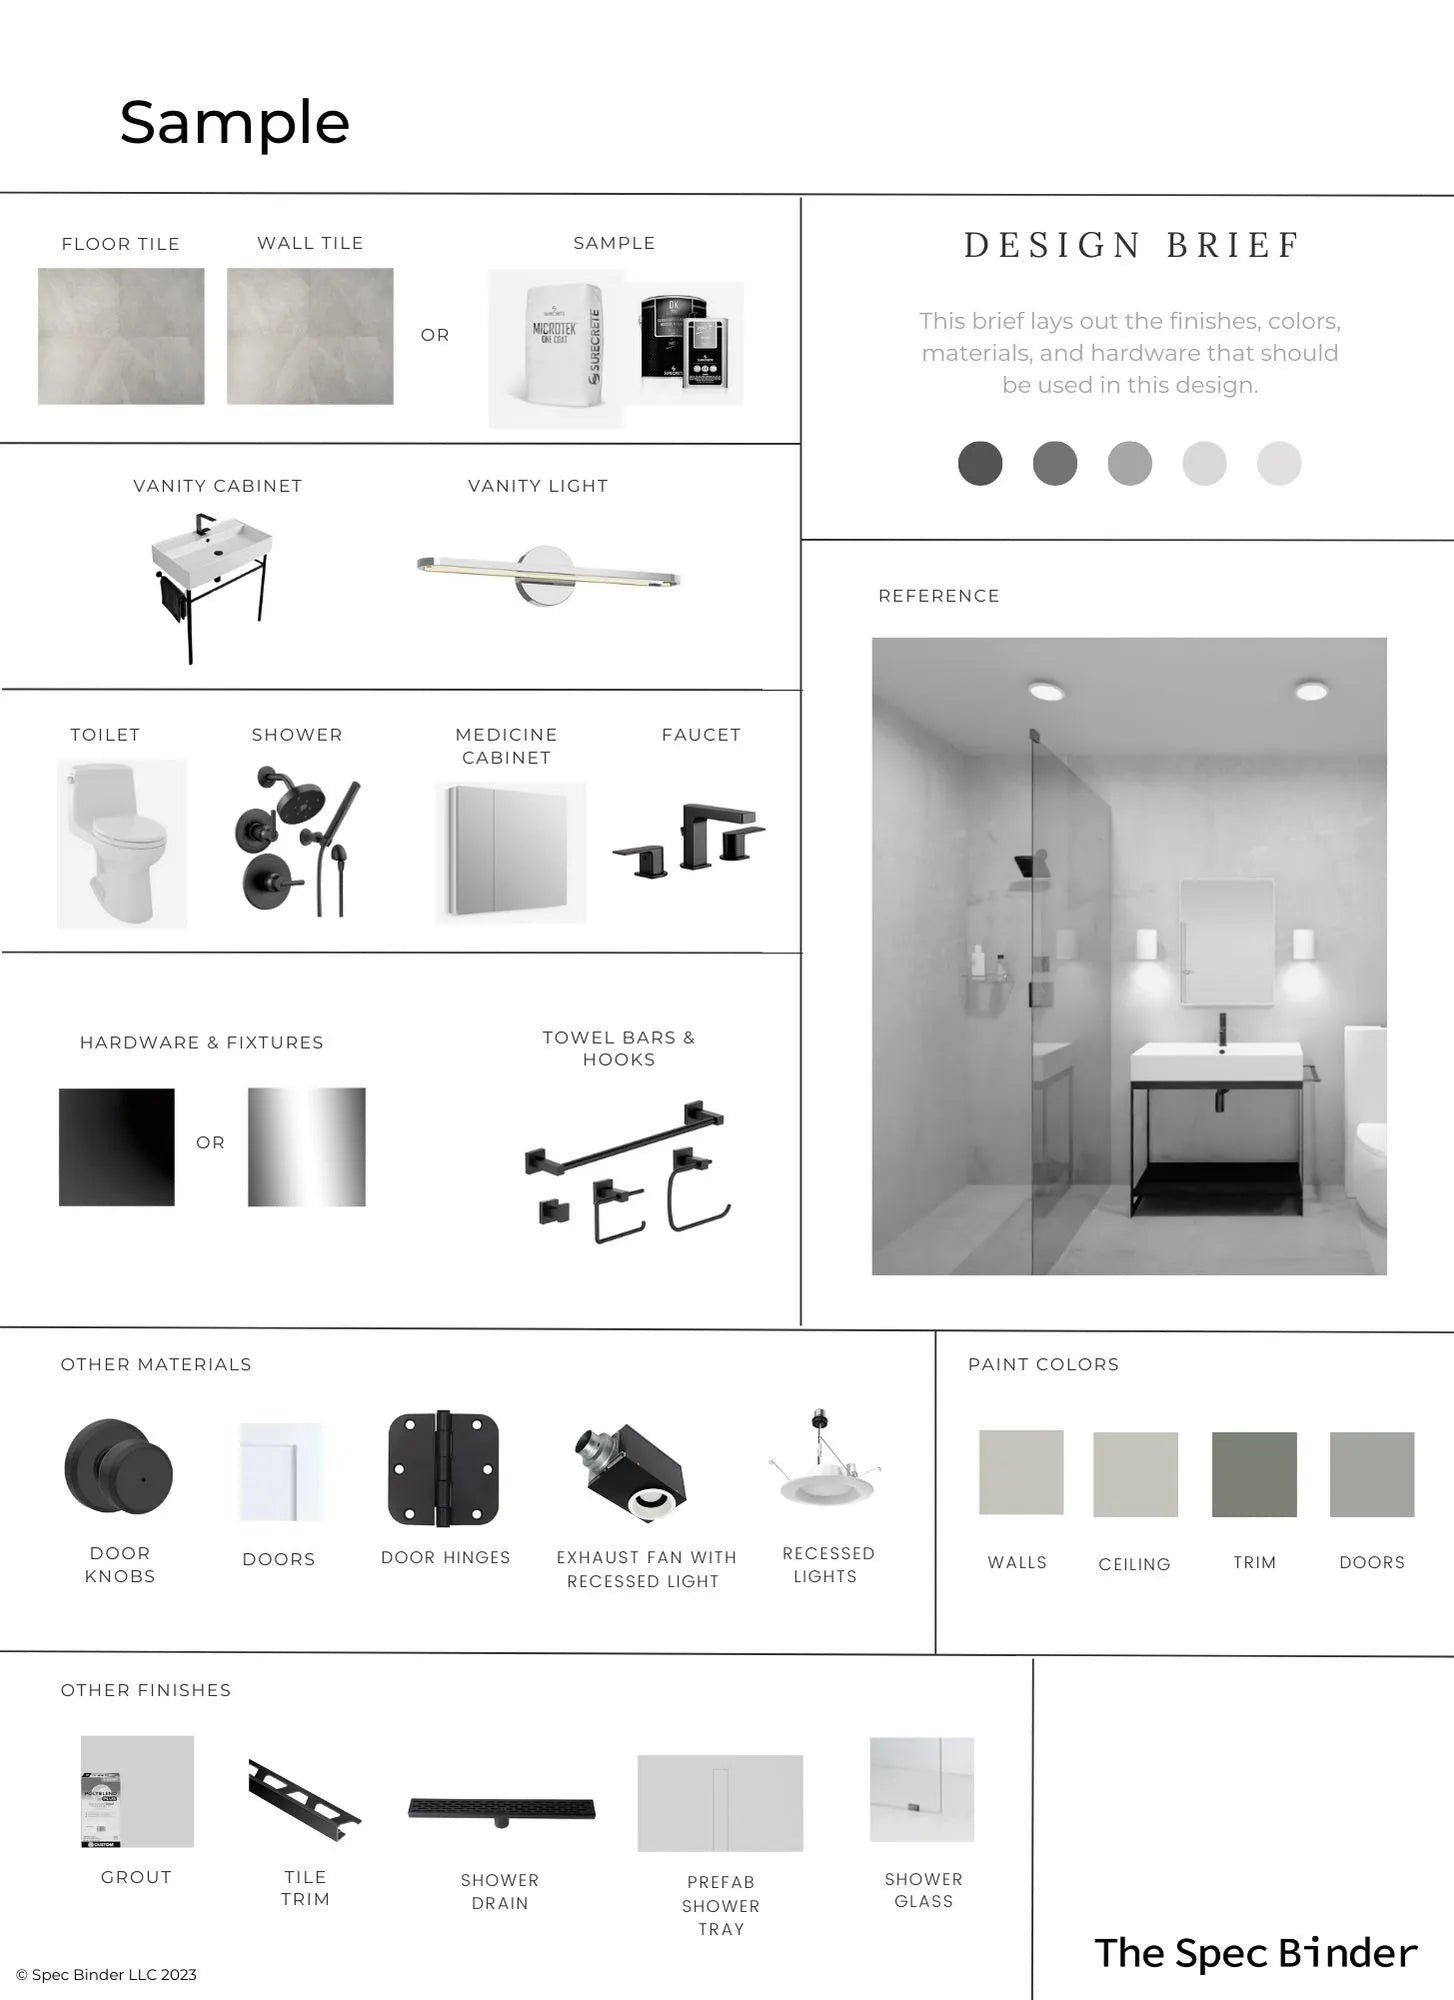 See photos of The Kenneth paint colors in different spaces.The Kenneth Full Bath reference images, paint samples, color swatches, and design elements. The Kenneth bathroom design is Tough, Simple, Cool, and Modern. The Kenneth room design includes 3D renderings, mood boards, color and finish palettes, paint schedules, tile schedules, design brief, product selections, an editable budget document, and a link for one-on-one phone support with our team of professional interior designers.